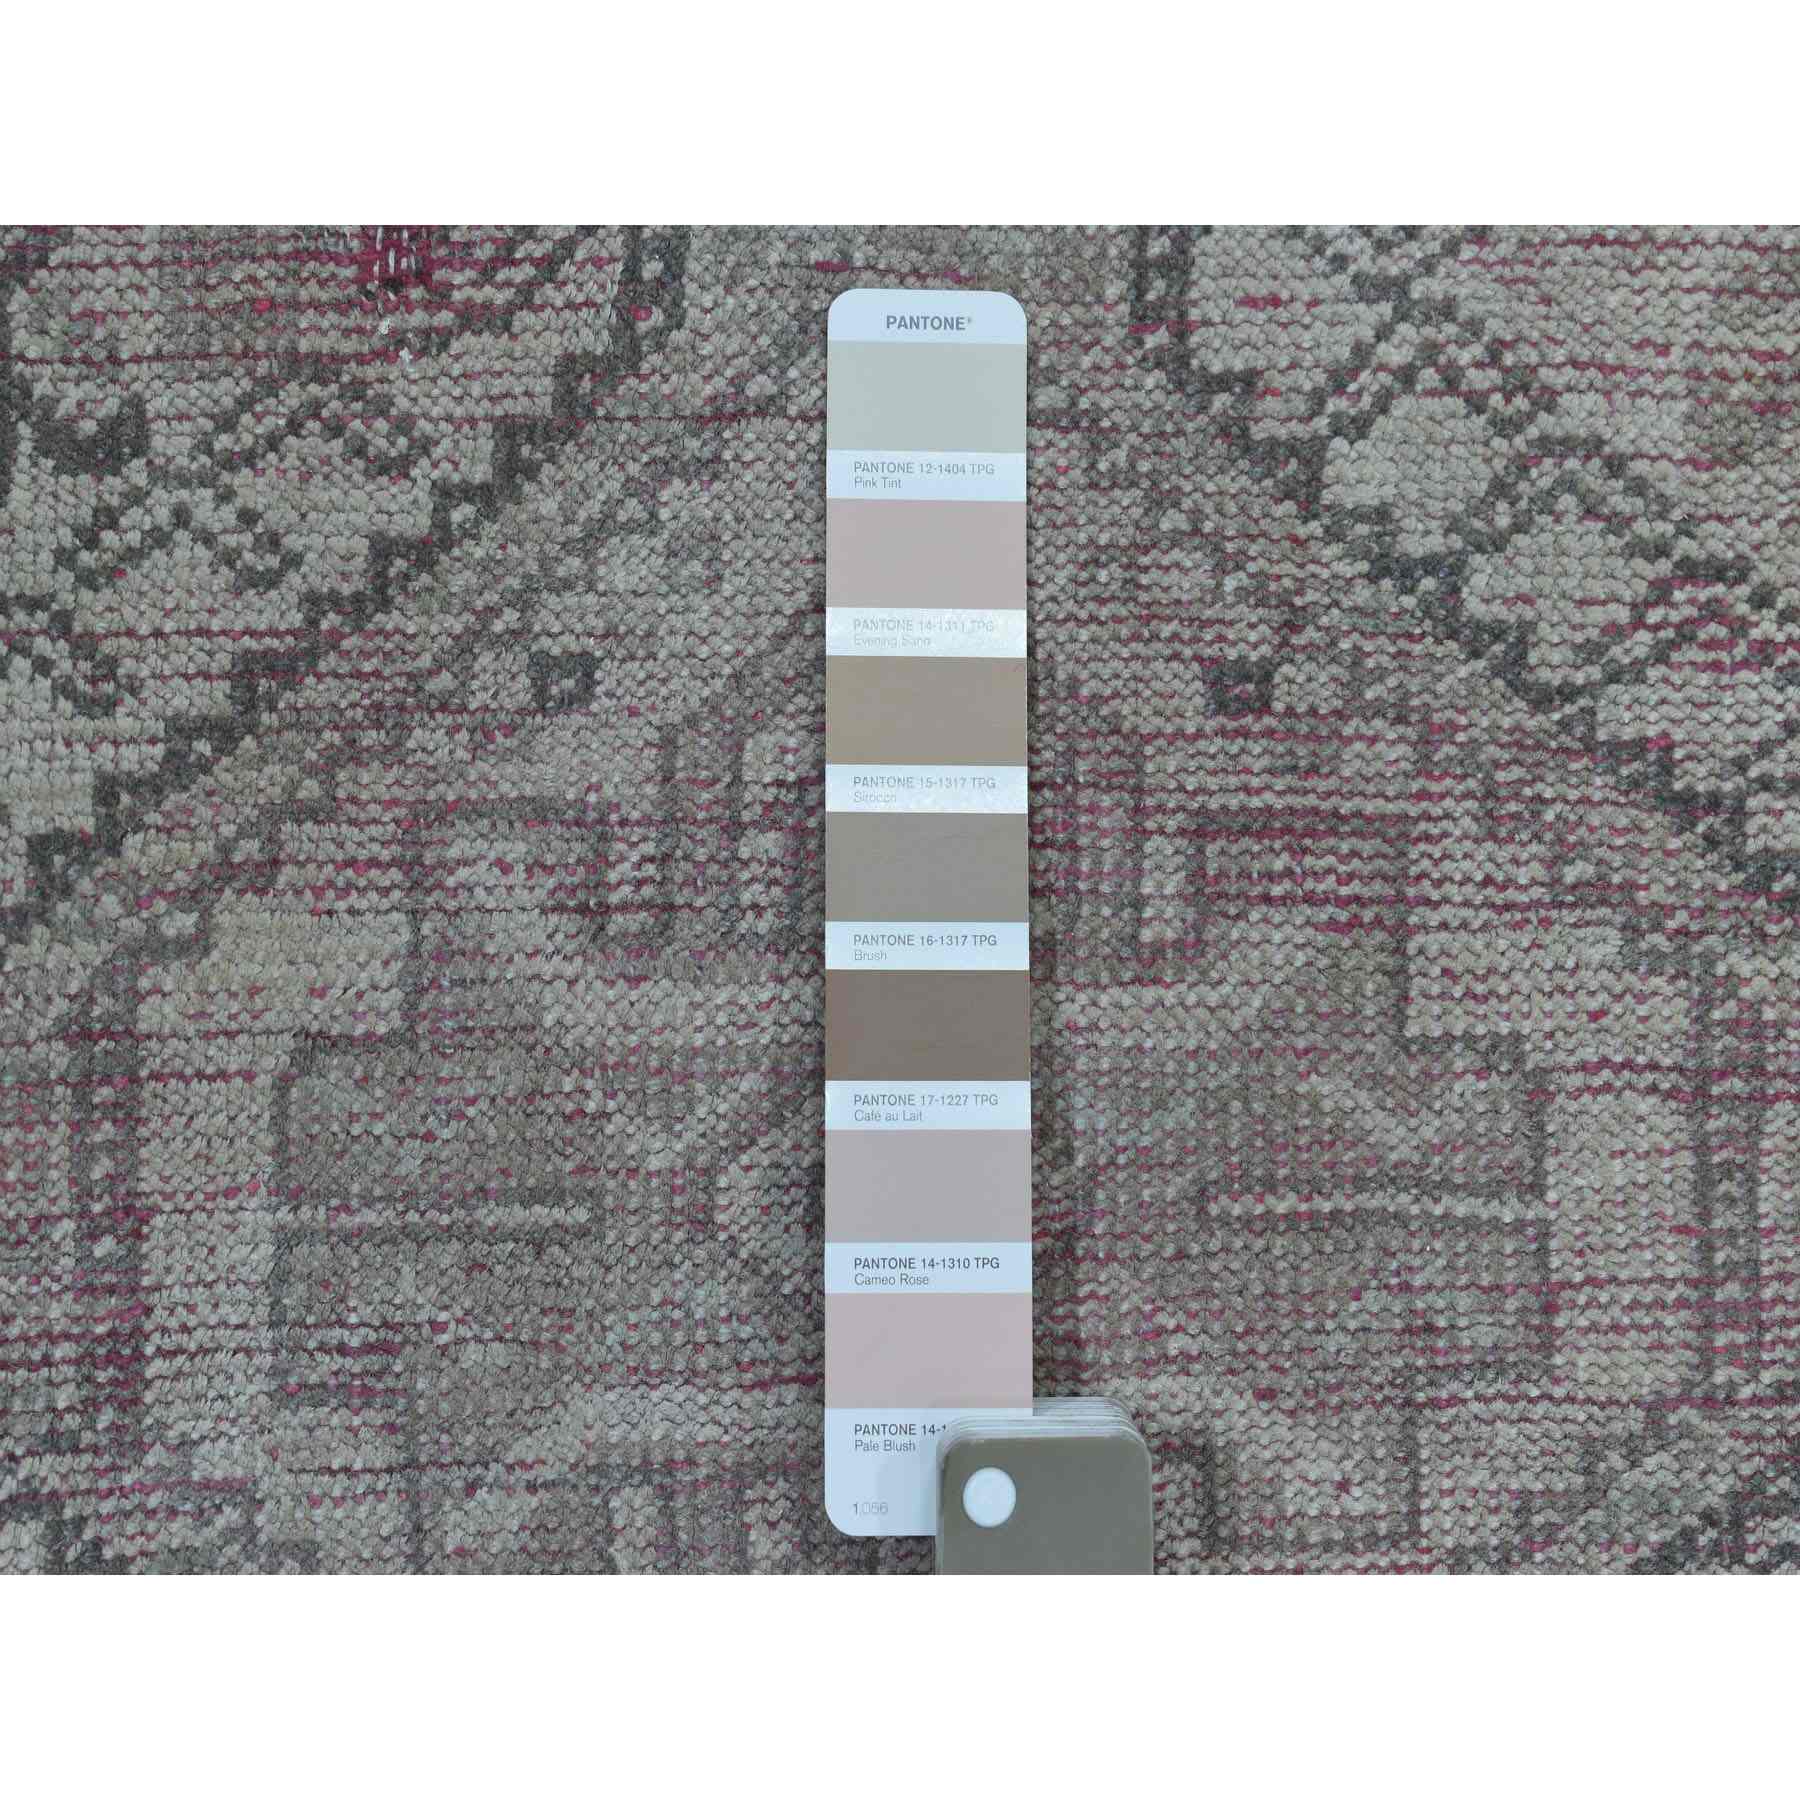 Overdyed-Vintage-Hand-Knotted-Rug-270255